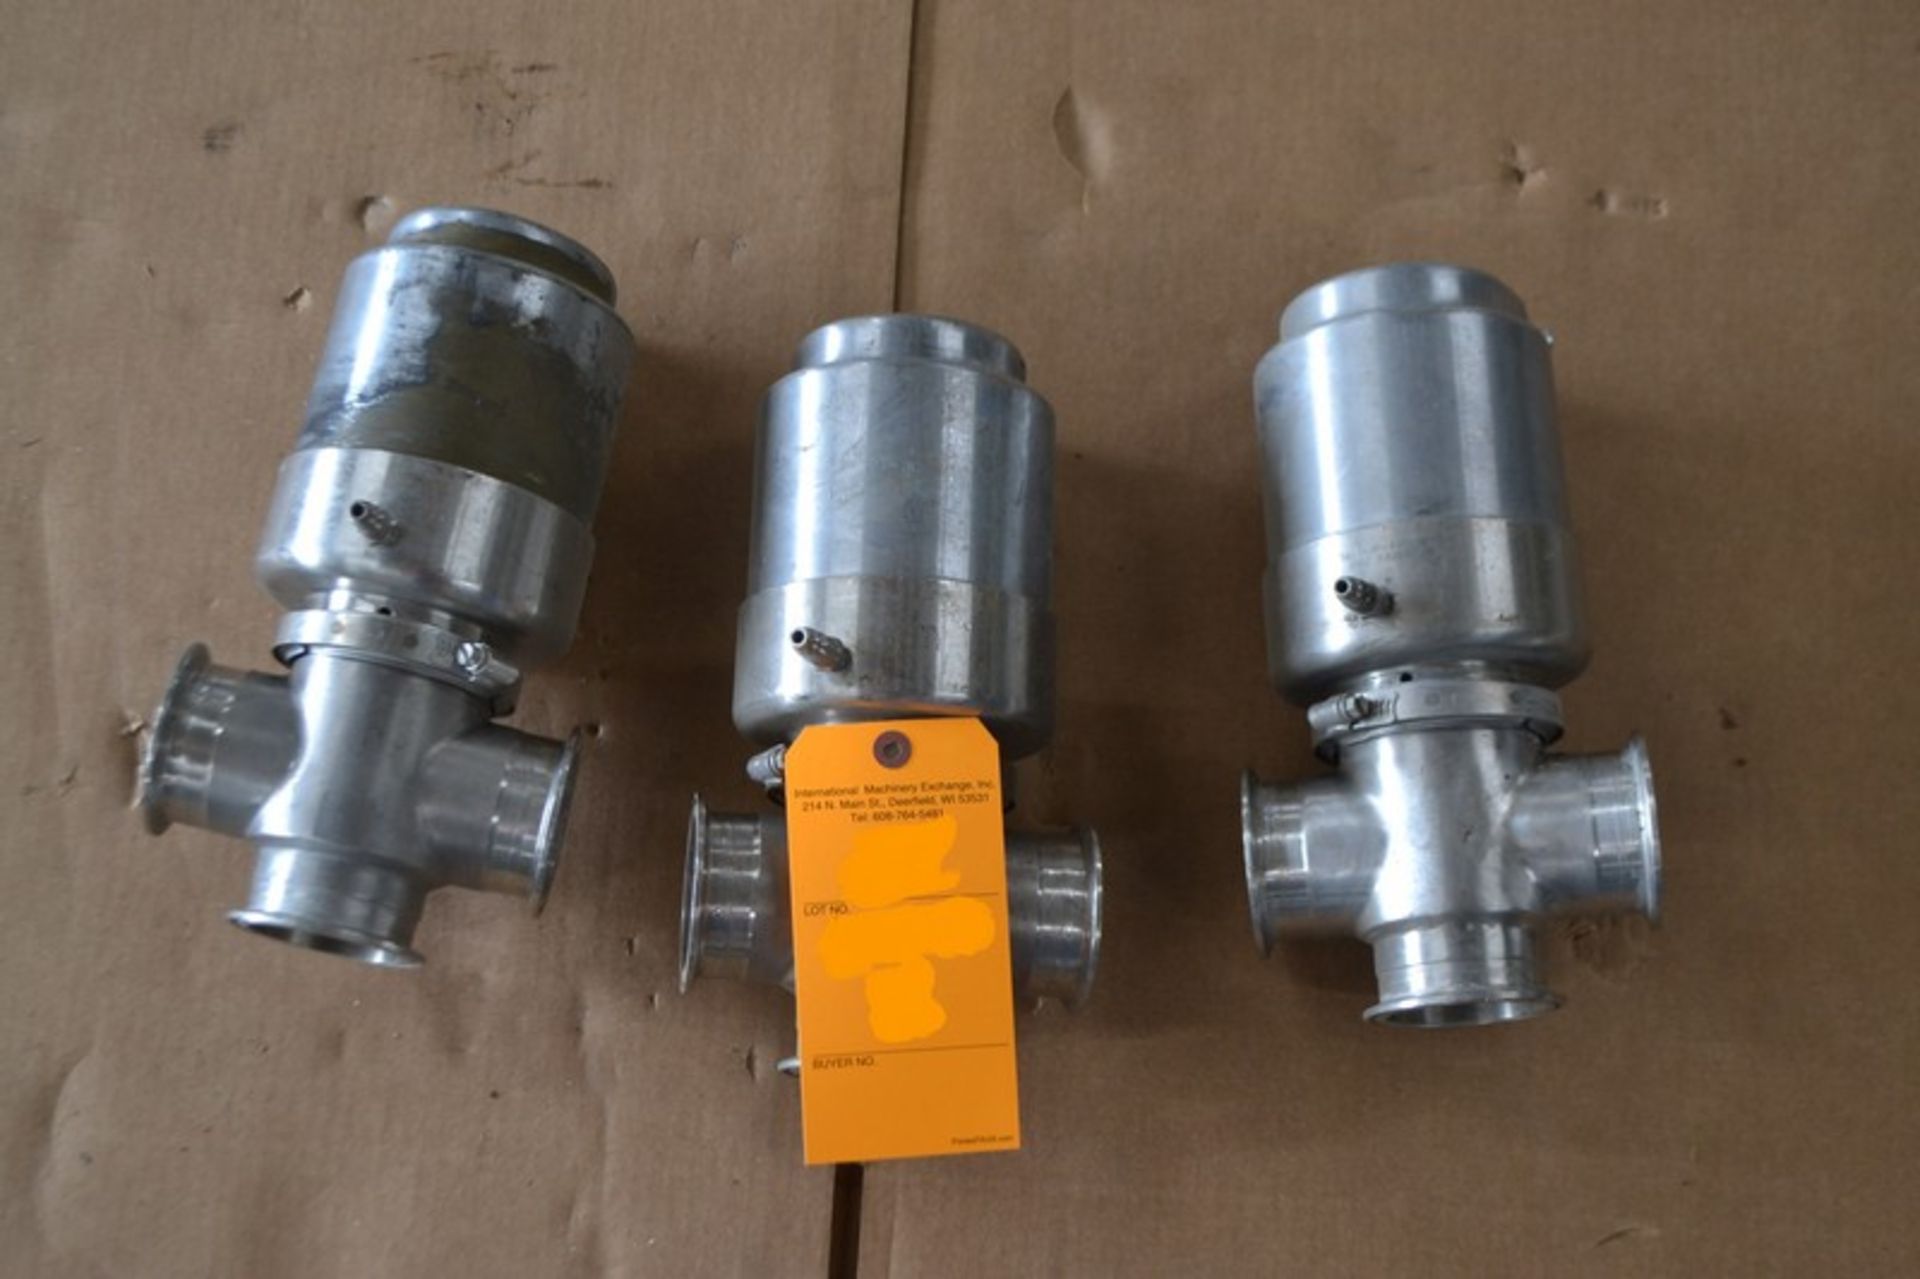 Lot of 3 Tri-Clover S/S Air Valves; 2.5" Cross Body. Required Loading Fee For Simple Loading $20. (